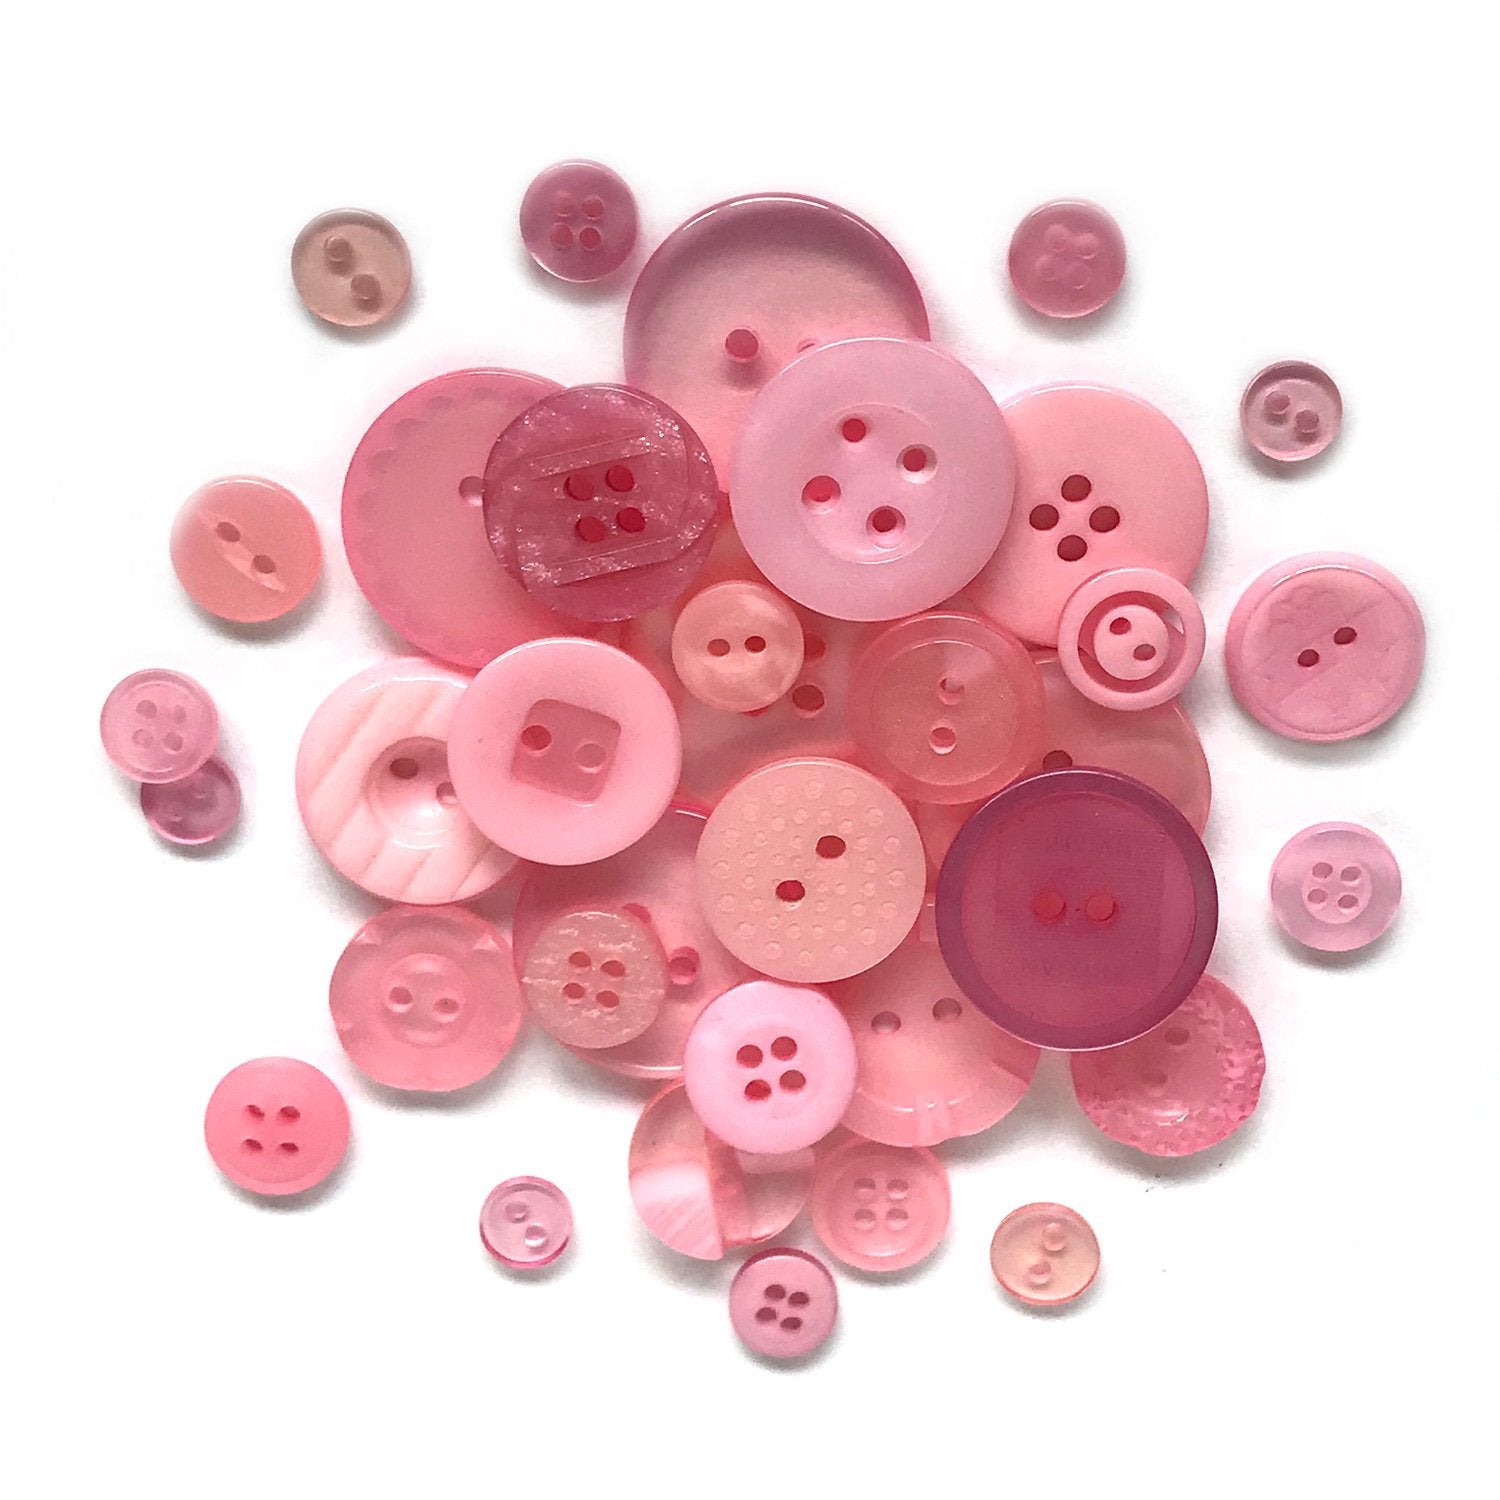 S&S Worldwide® Assorted Buttons, 1lb.